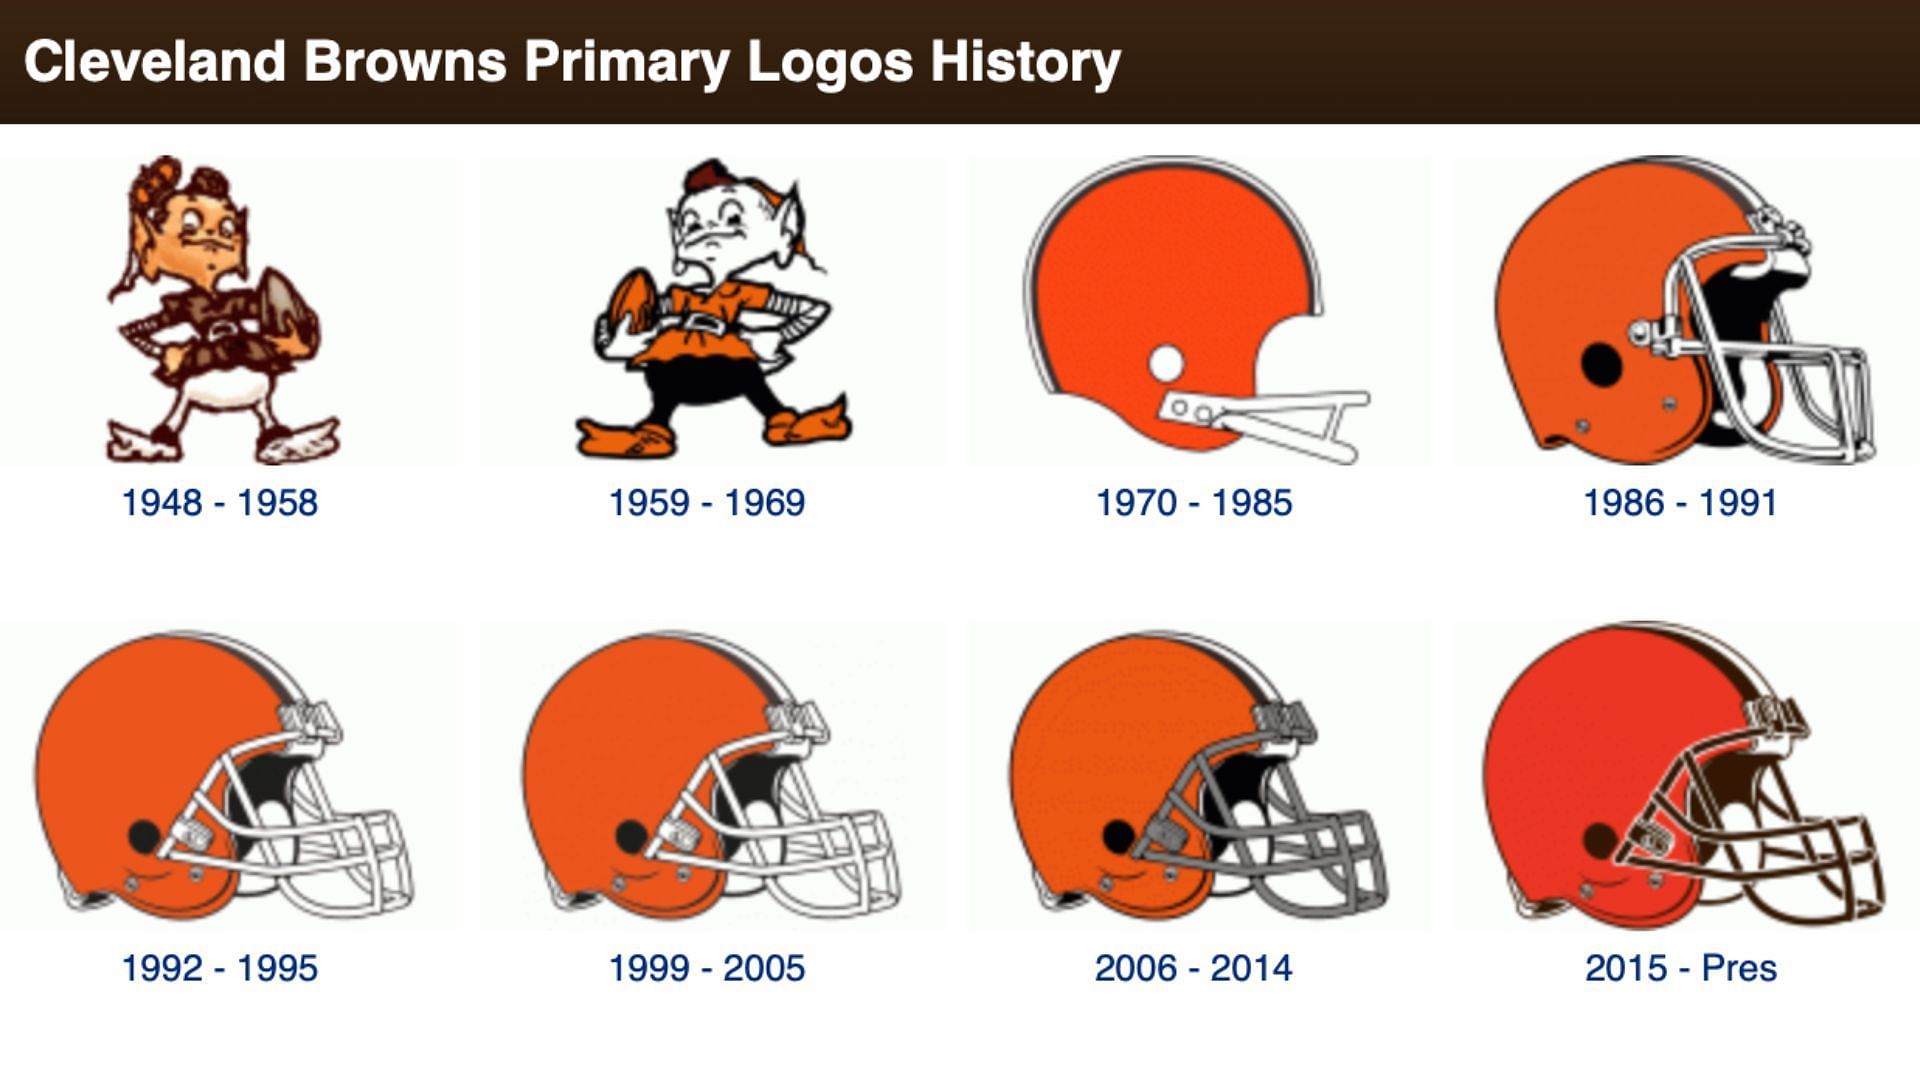 The history of the team&#039;s logos. Credit: SportsLogos.Net